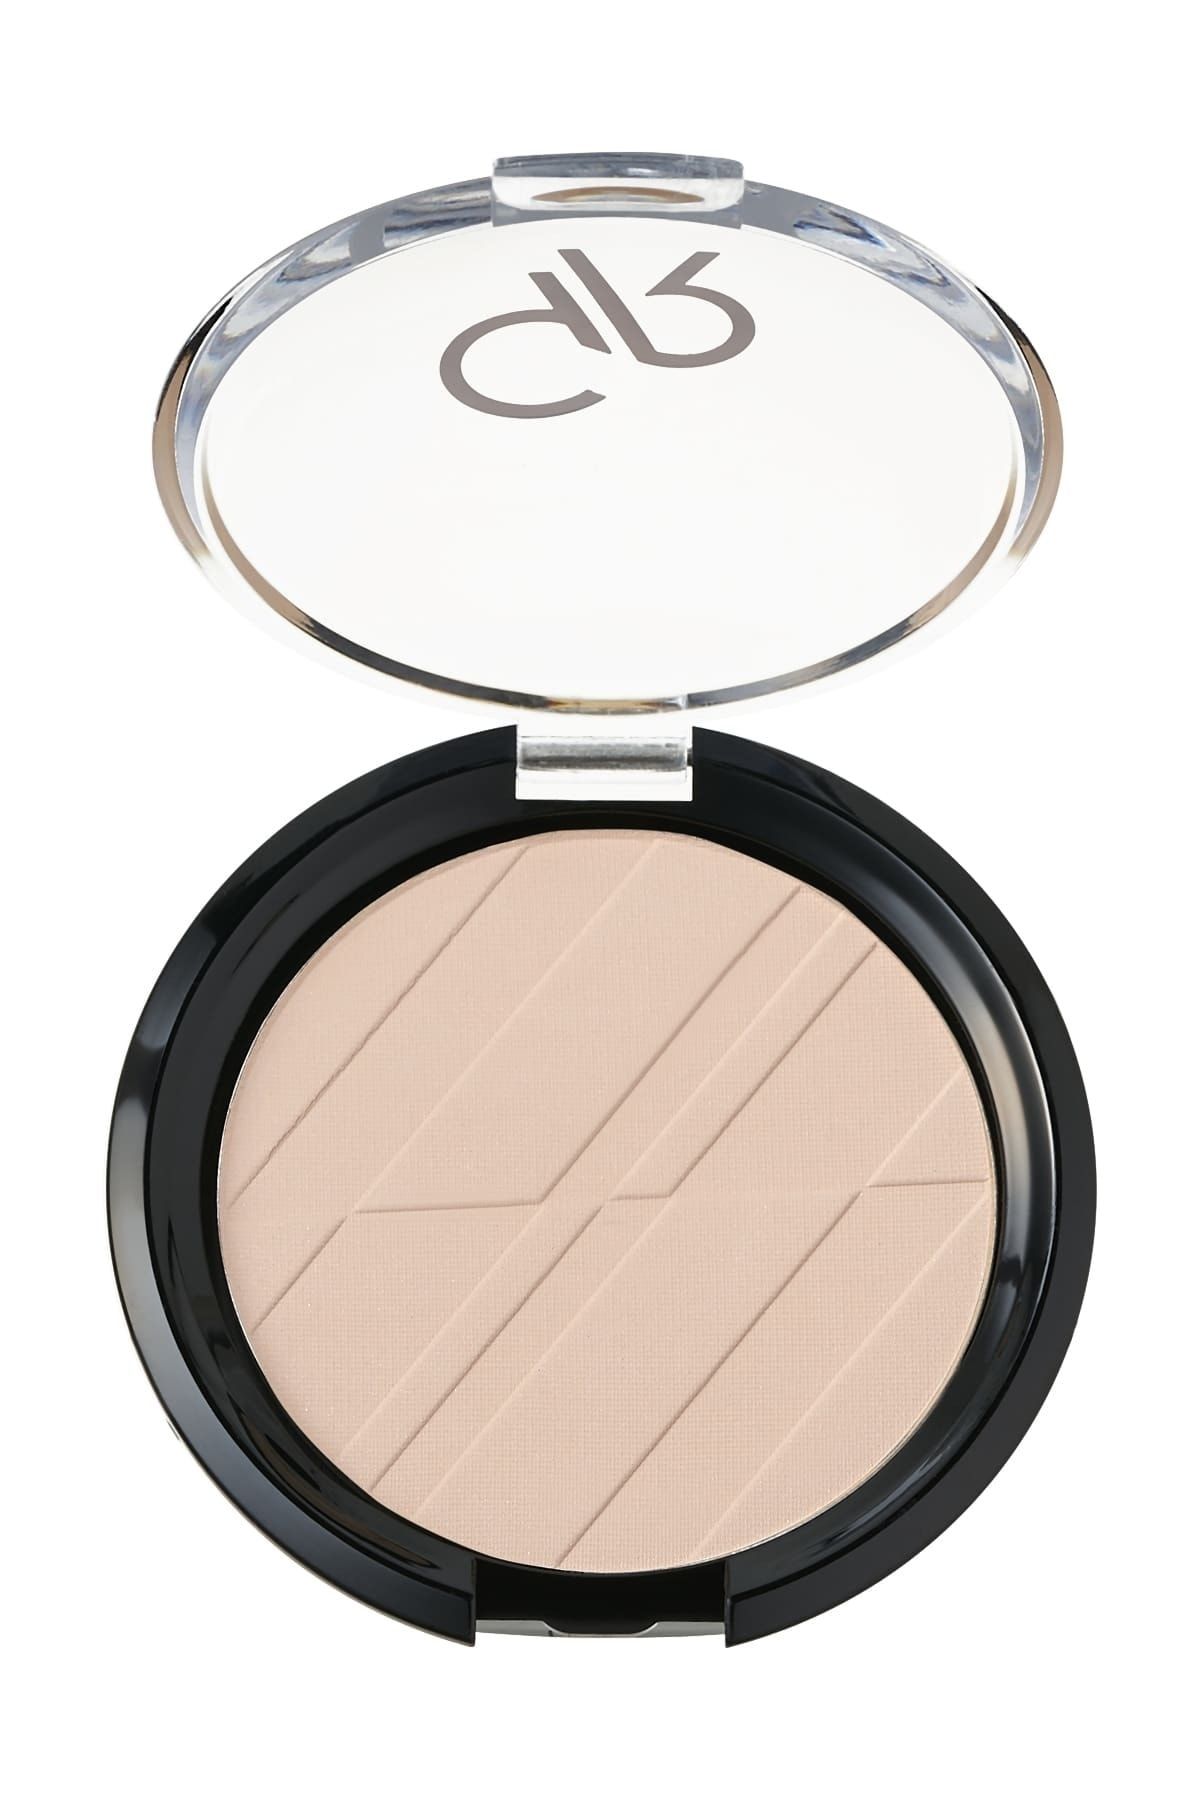 Golden Rose Pudra - Silky Touch Compact Powder No: 02 8691190115029